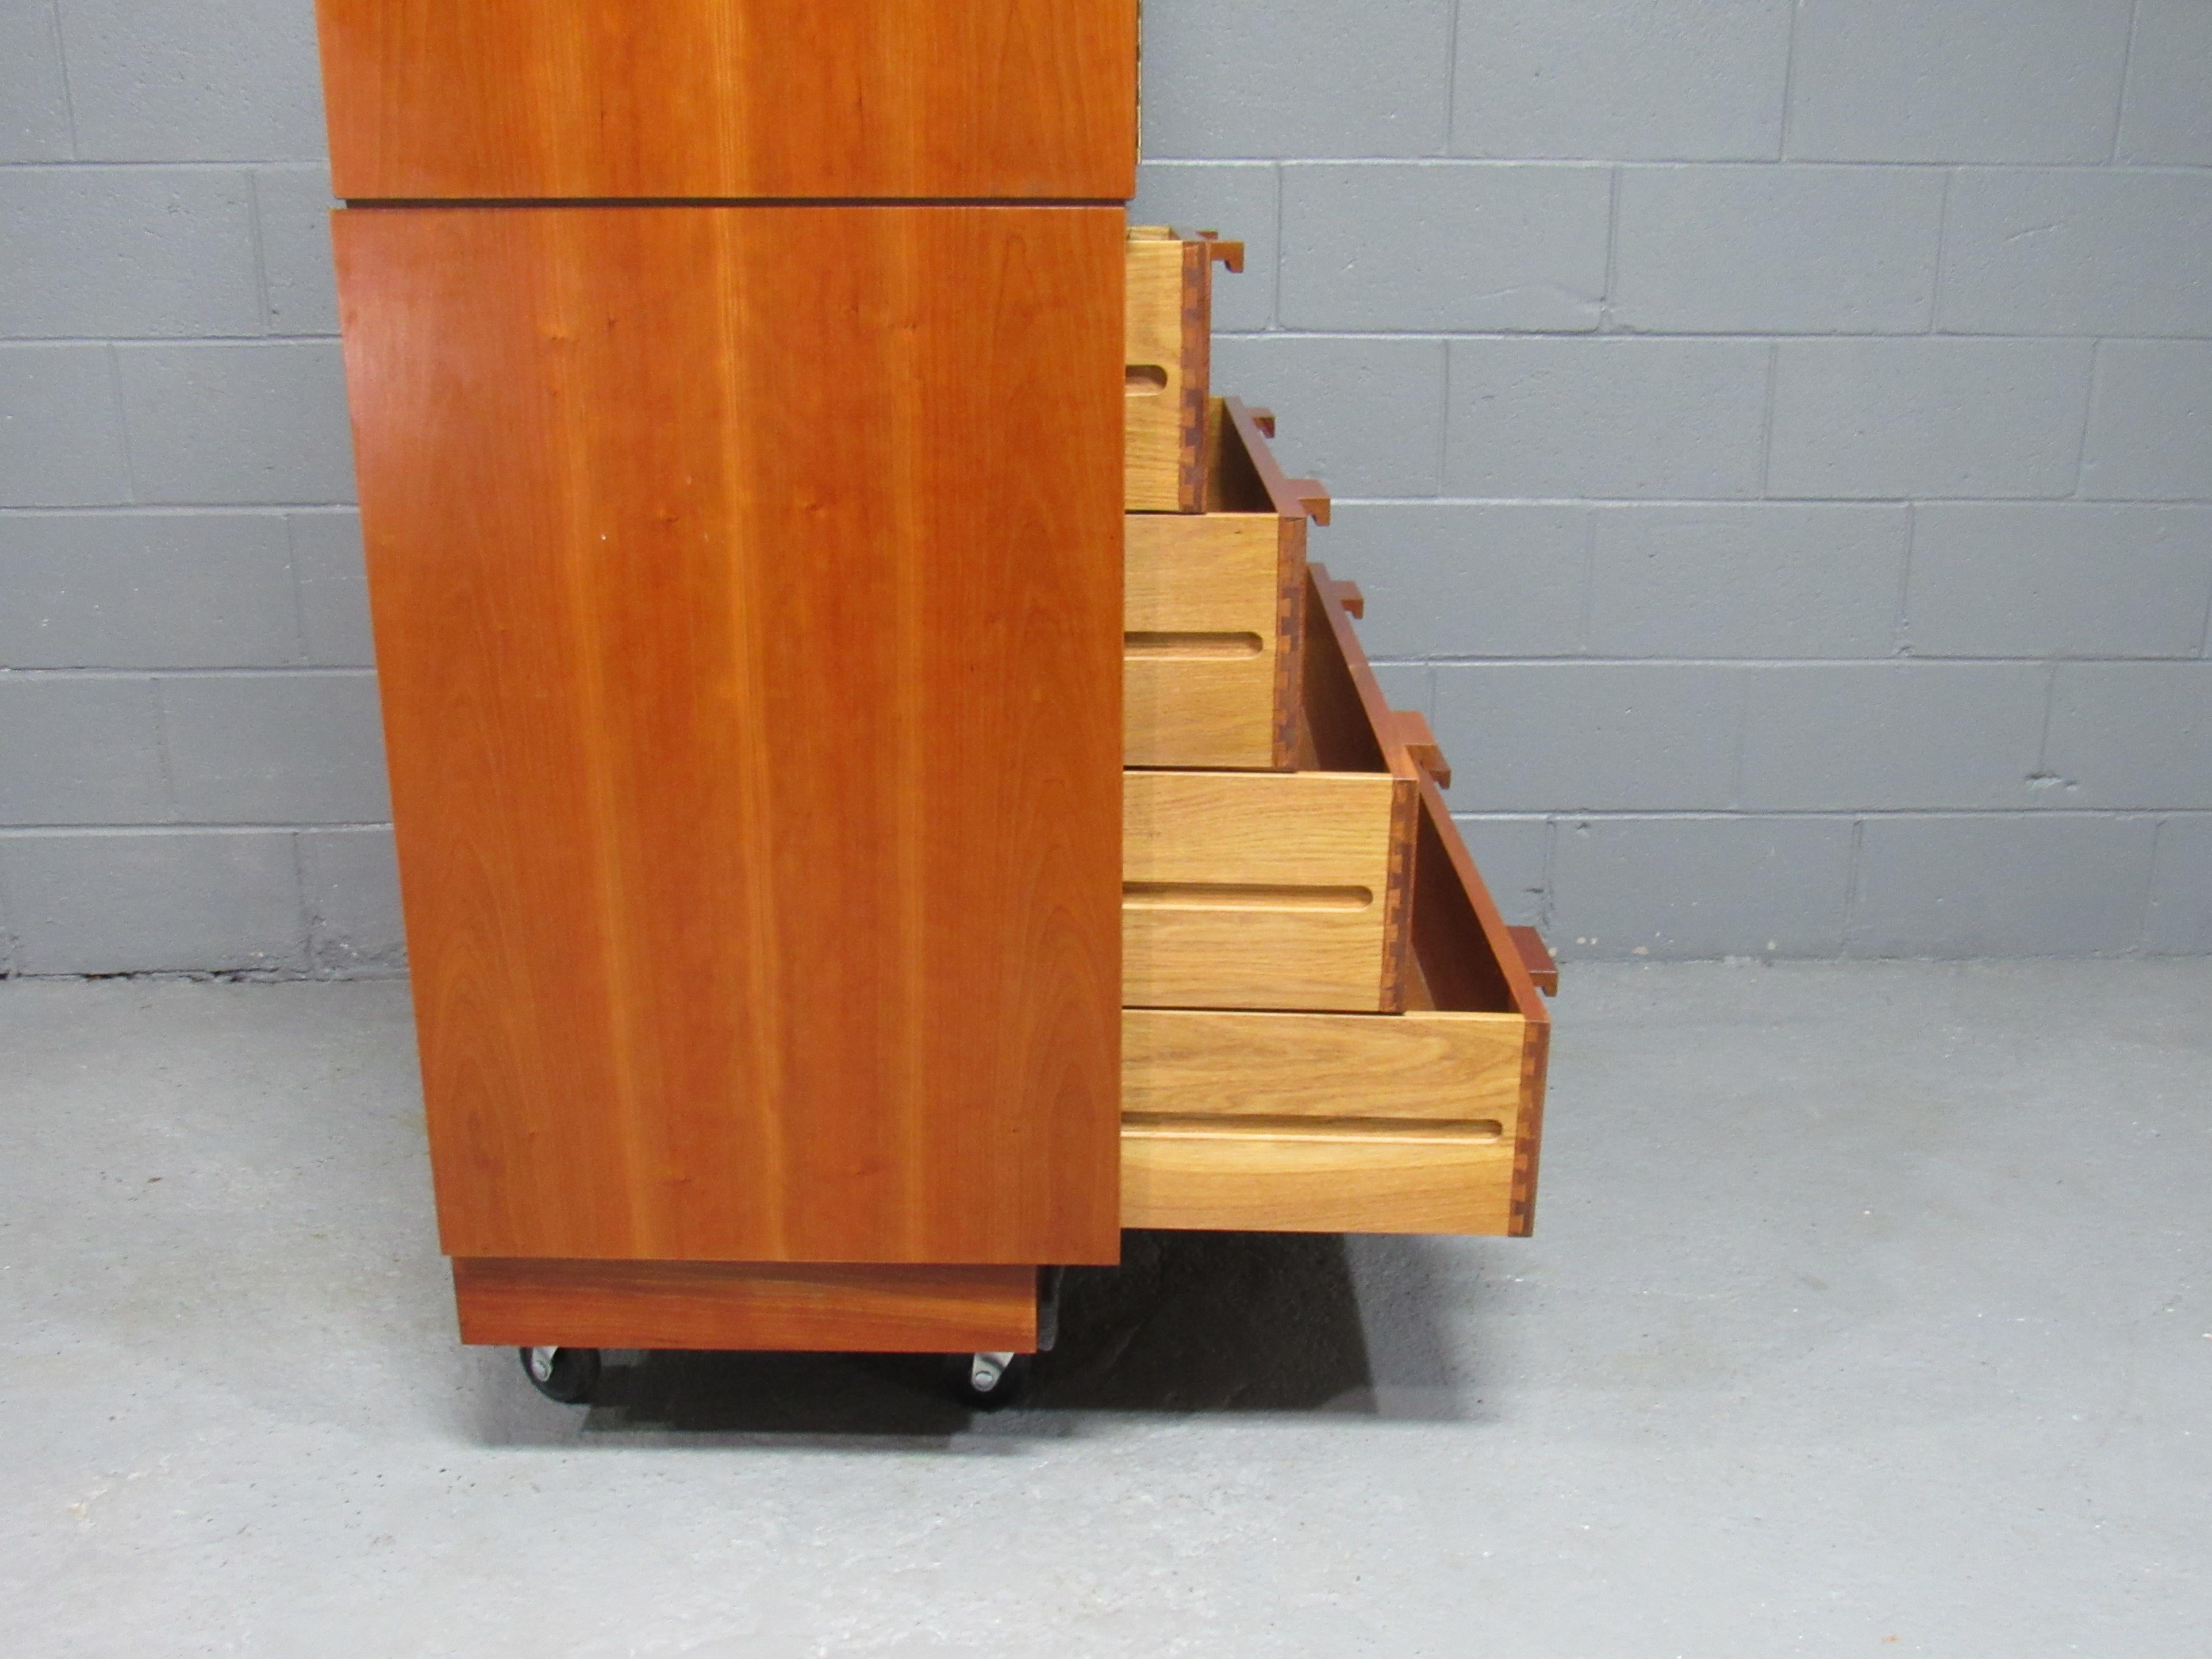 Vintage modern 1980s solid cherry wardrobe and chest of drawers by Charles Webb. Simple yet elegant design and impeccable craftsmanship are the hallmarks of Charles Webb's design. The solid cherrywood has gorgeous graining and patina. Top cabinet